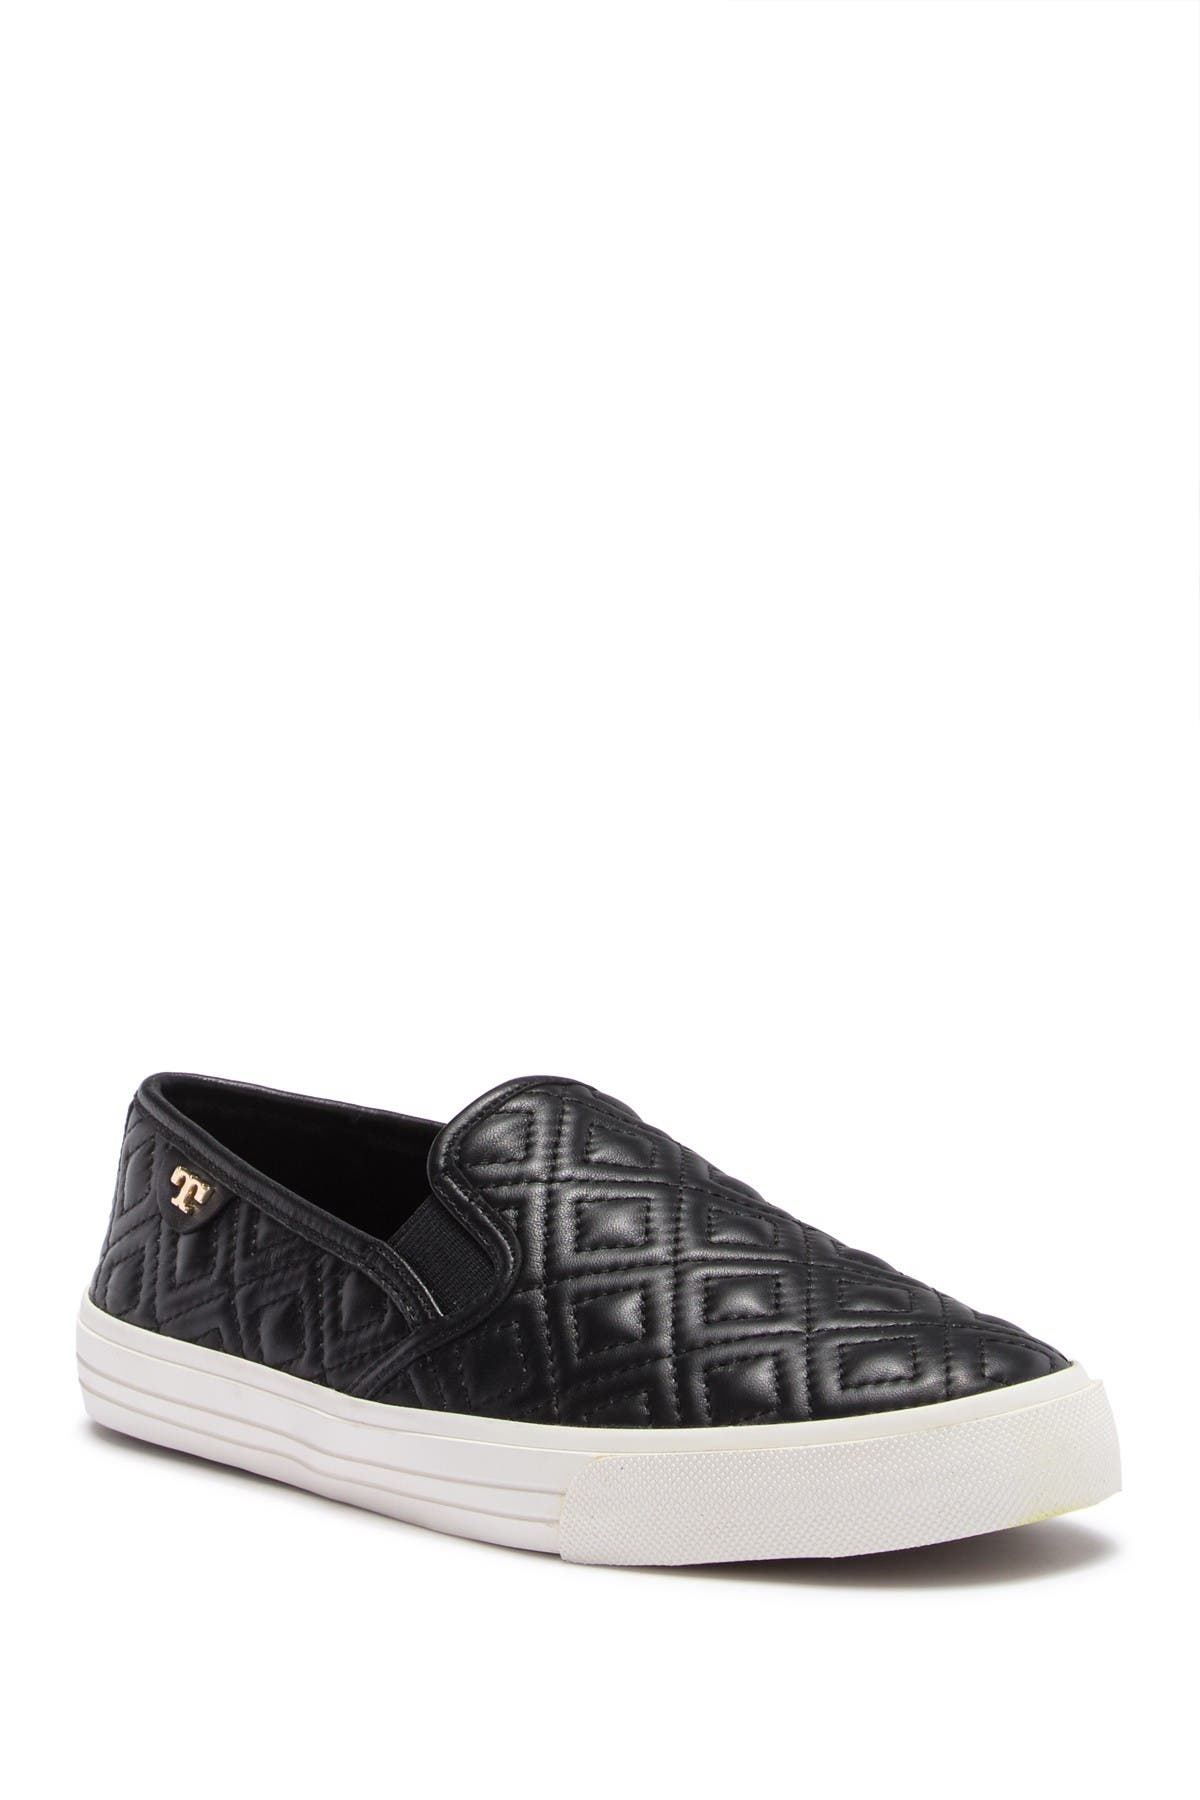 tory burch jesse quilted sneaker